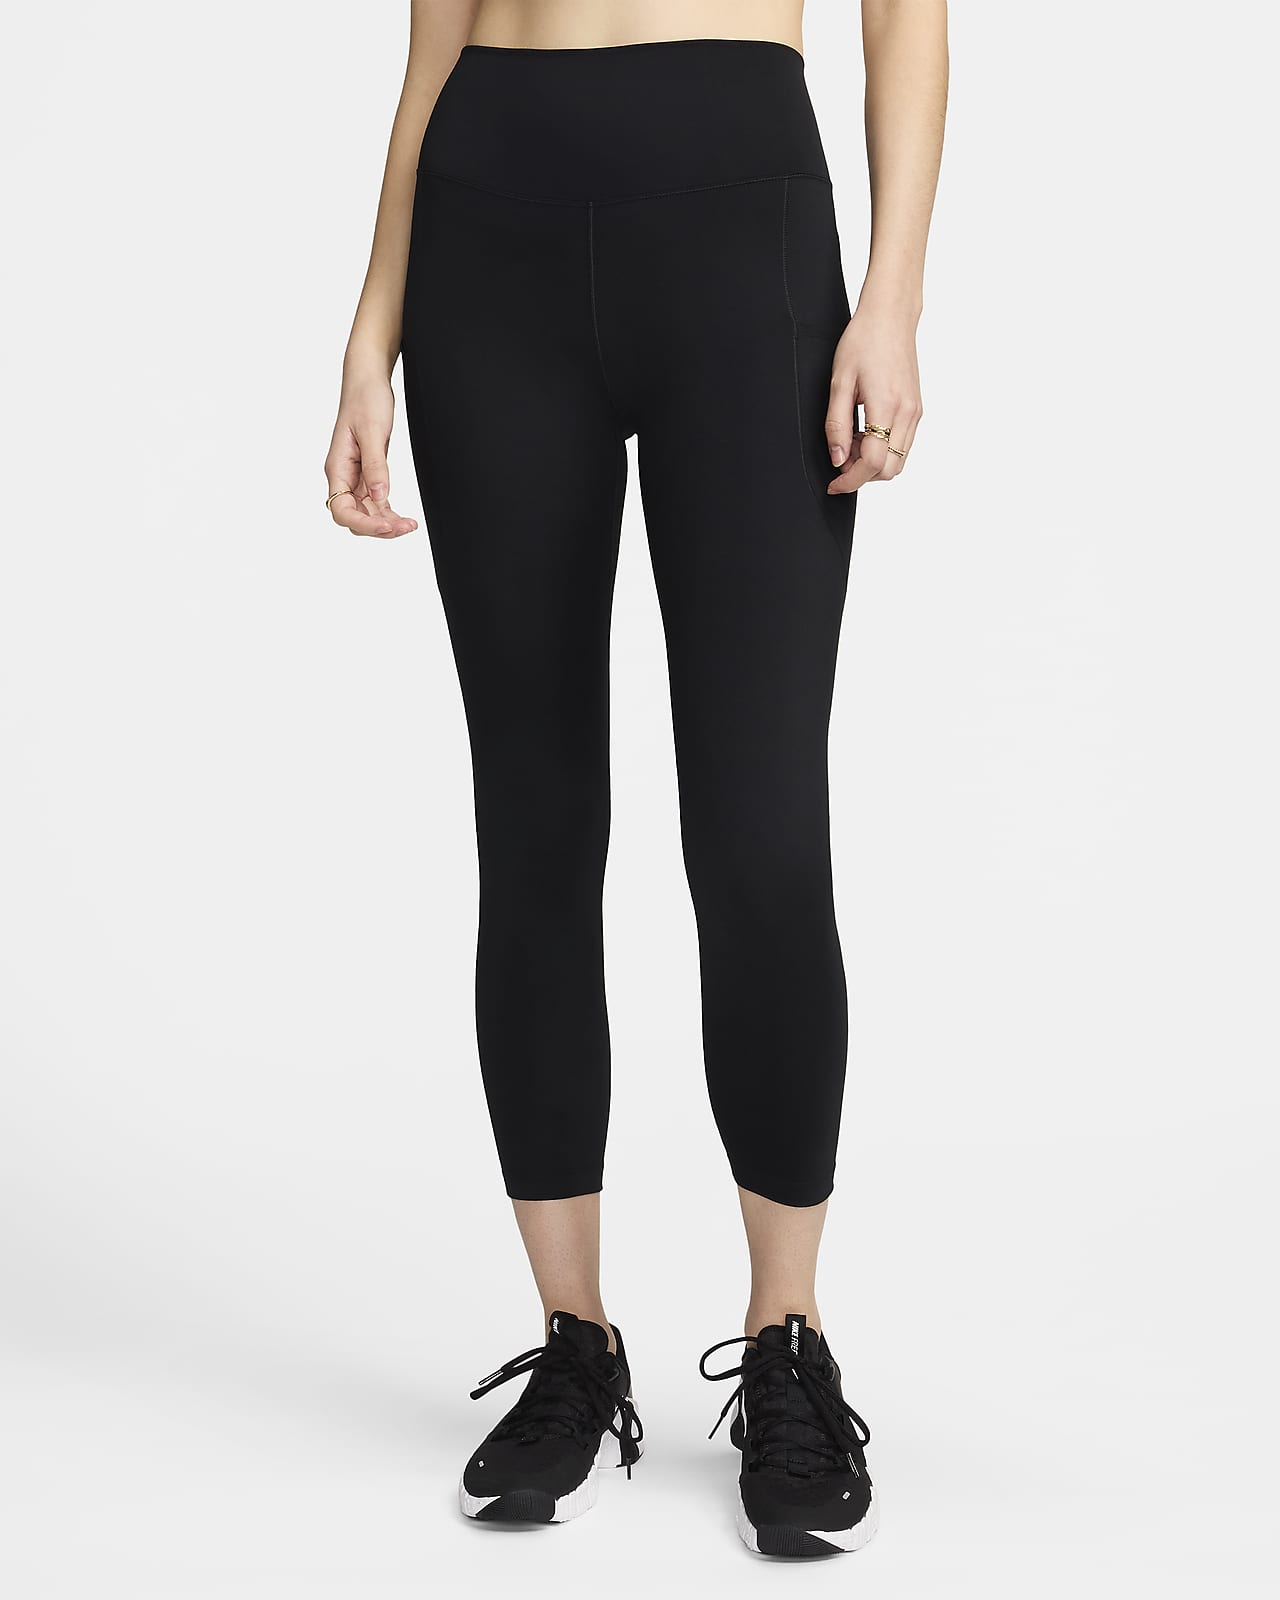 Nike One Women's High-Waisted 7/8 Leggings with Pockets